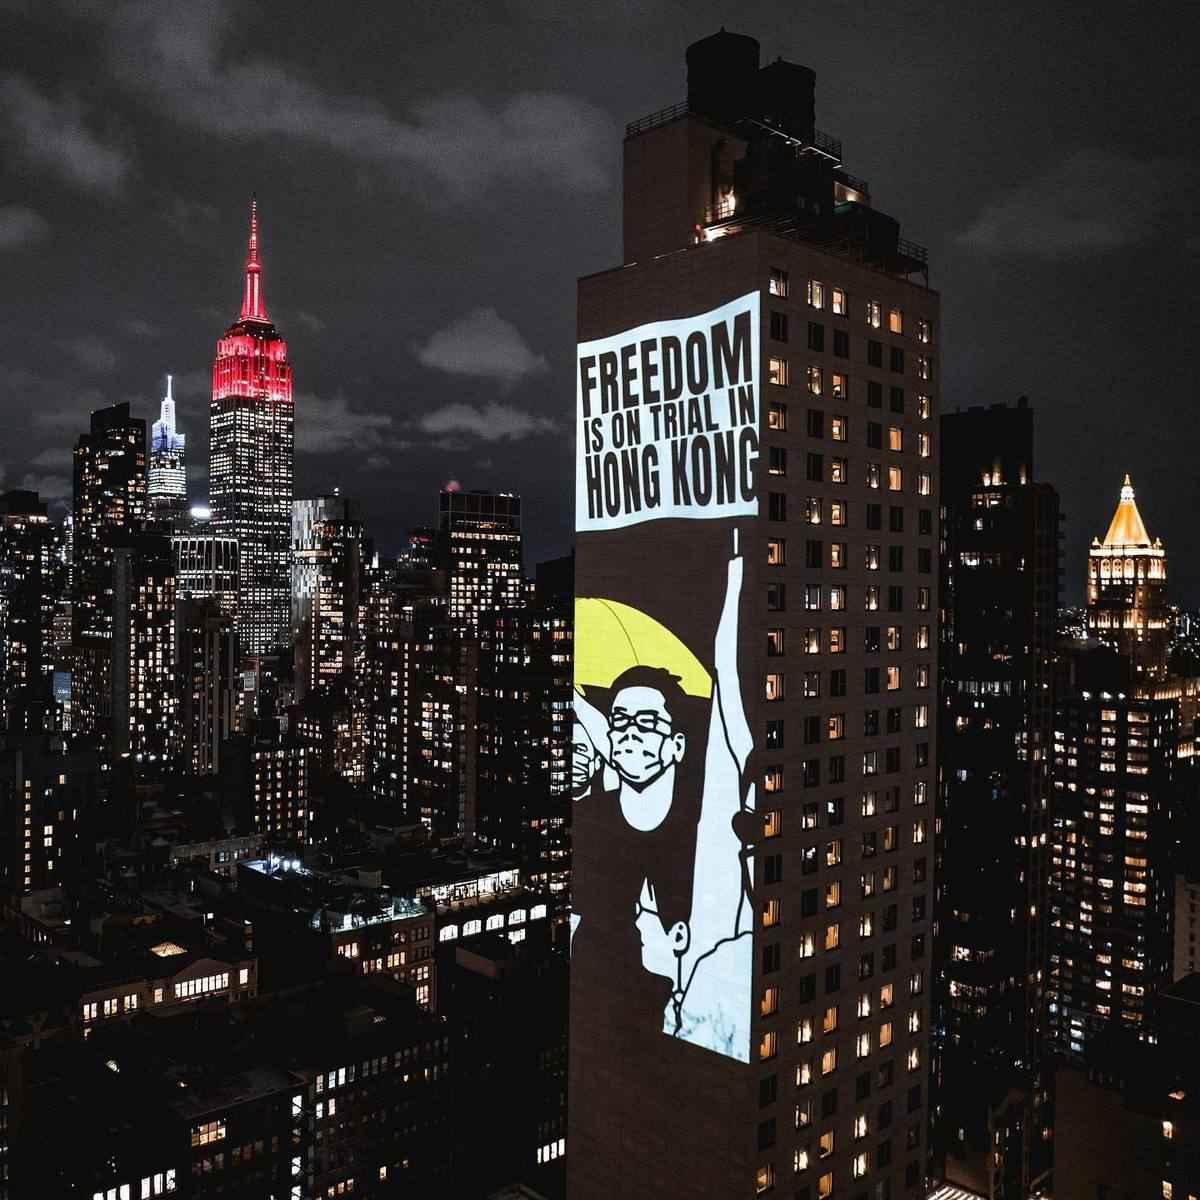 The organization chose to hold the projection art event in New York on the eve of International Women's Day on March 8, 2023, to let the world know the names of the political prisoners and call for their immediate release. (Courtesy of The Committee for Freedom in Hong Kong Foundation)